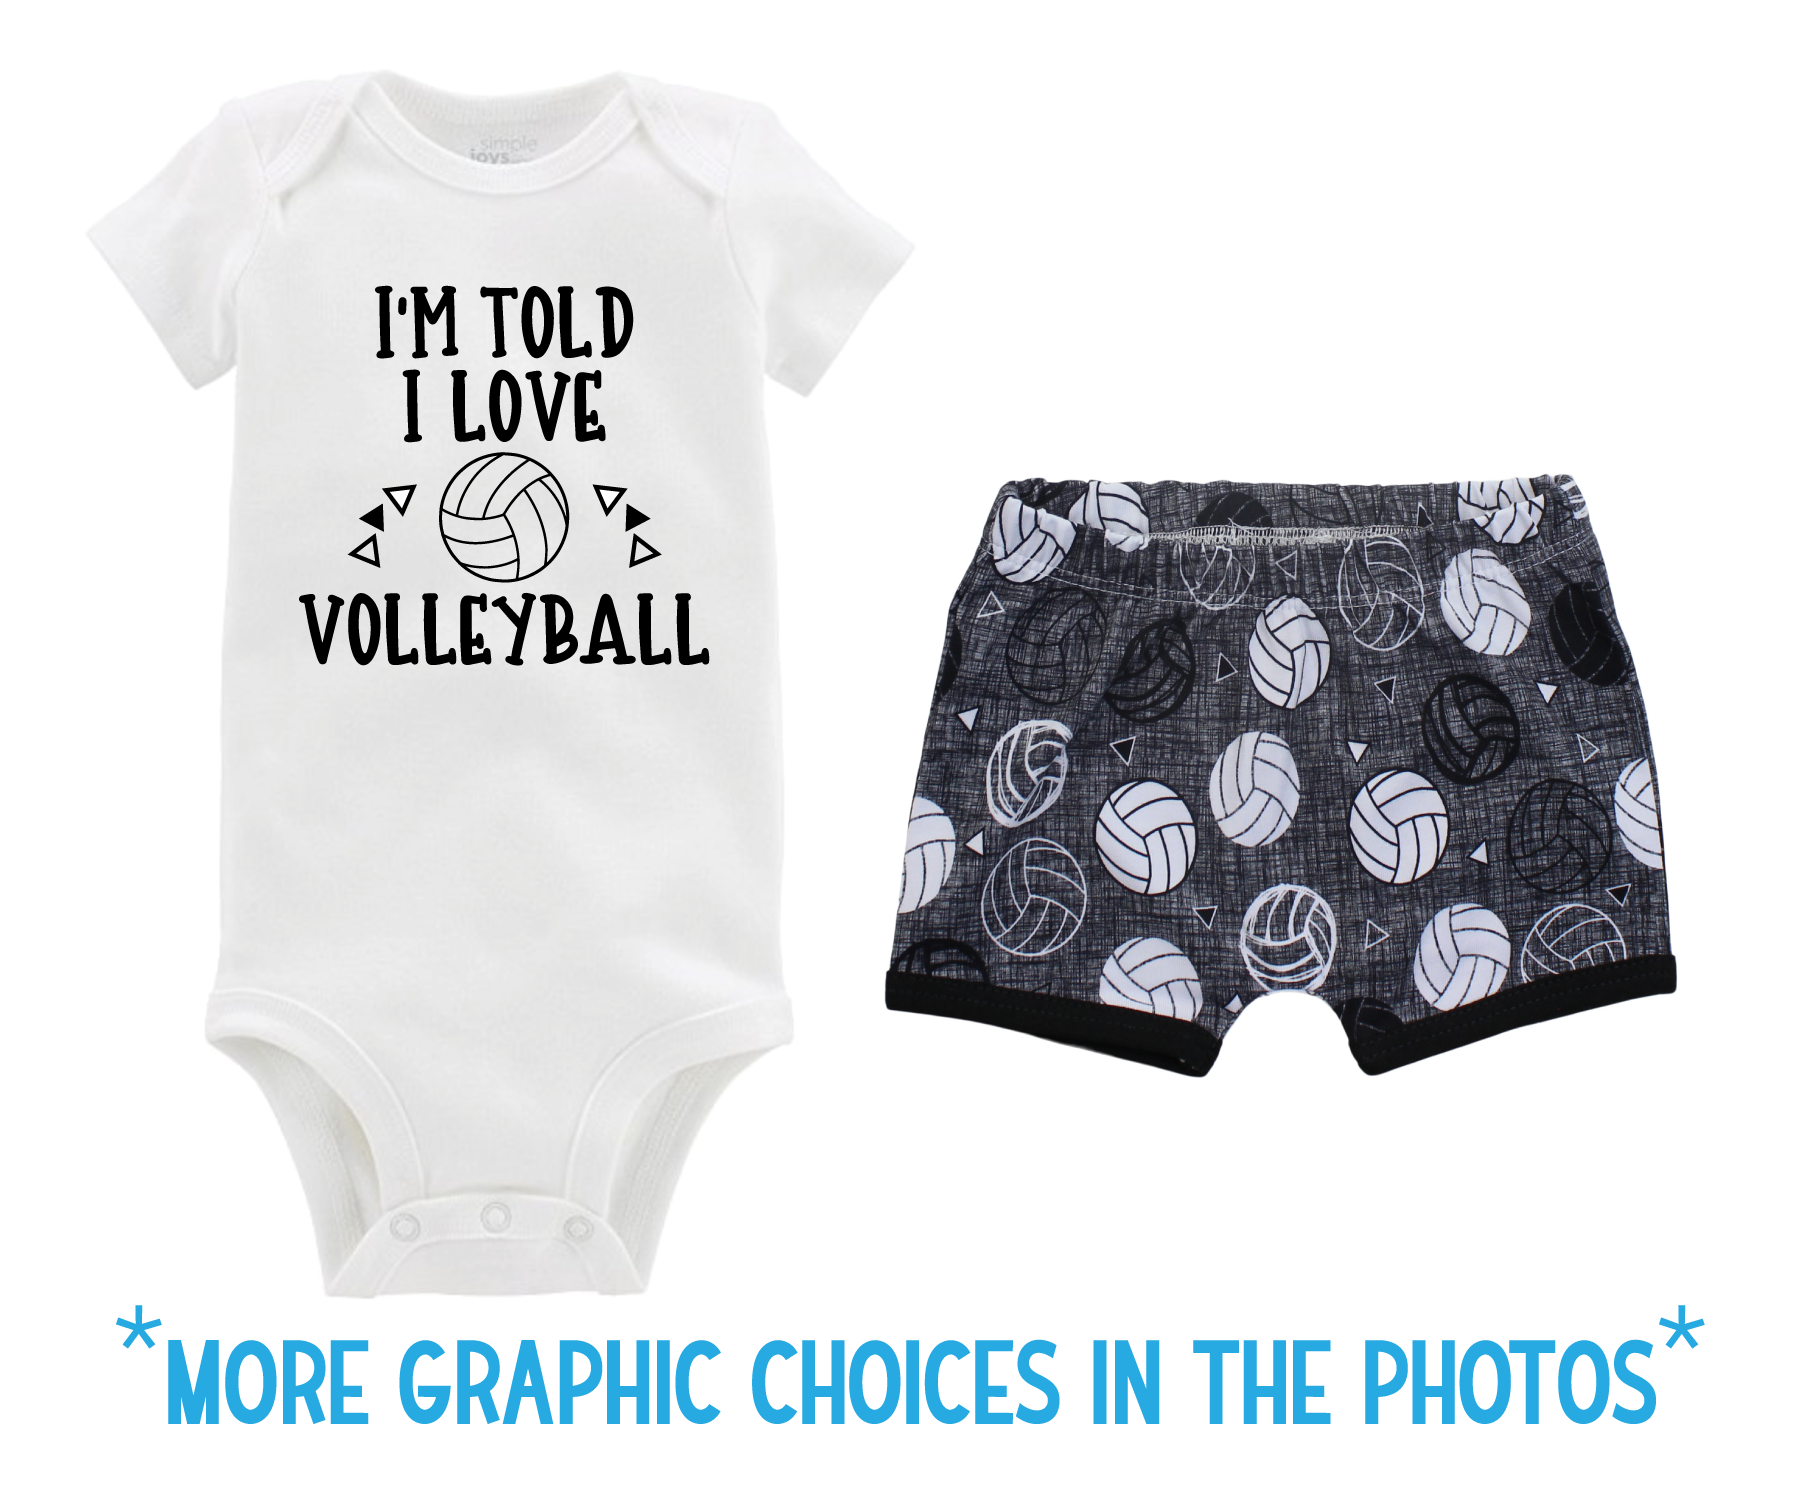 Unisex Gray Volleyball Short Outfit